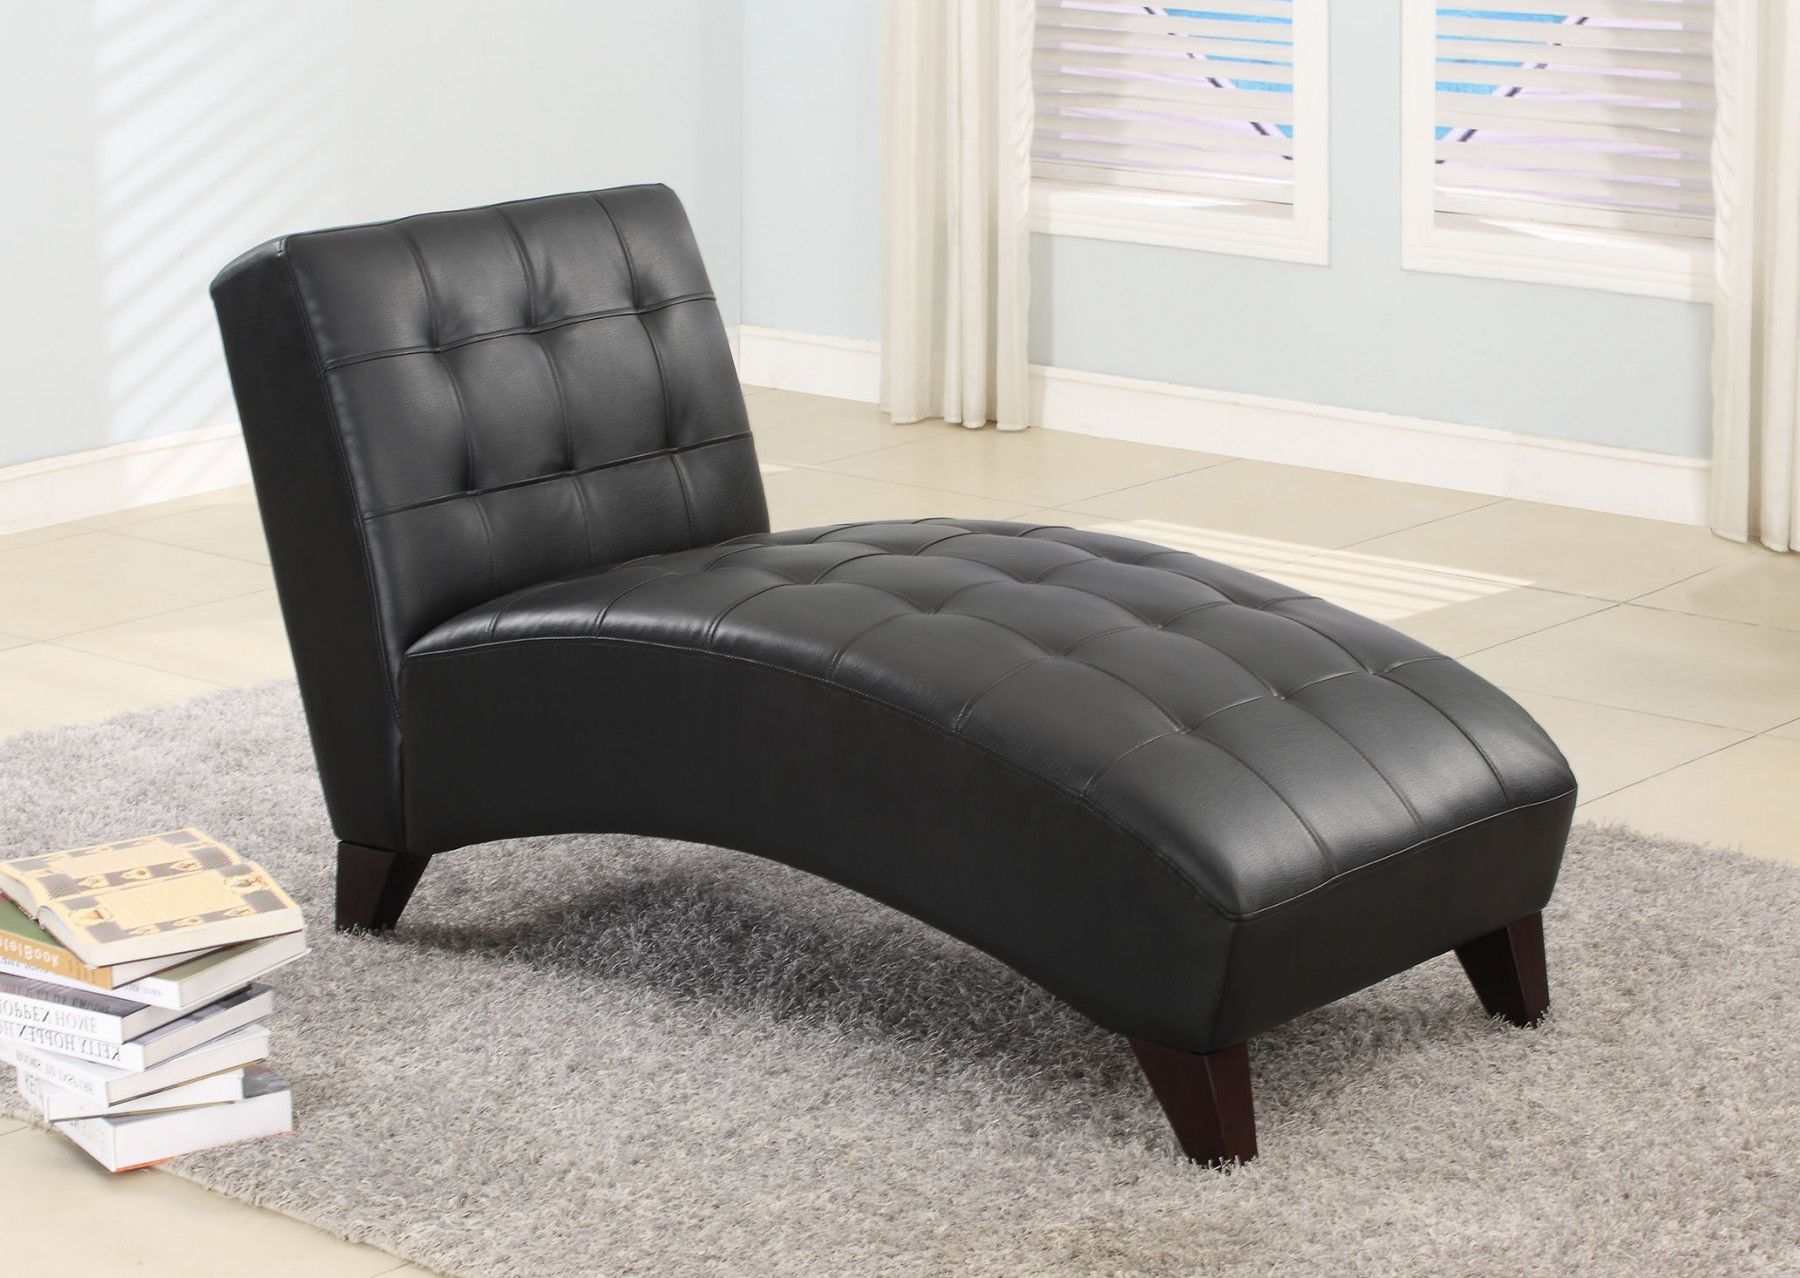 Indoor Leather Chaise Lounge Chair — Lustwithalaugh Design With Newest Black Chaises (View 5 of 15)